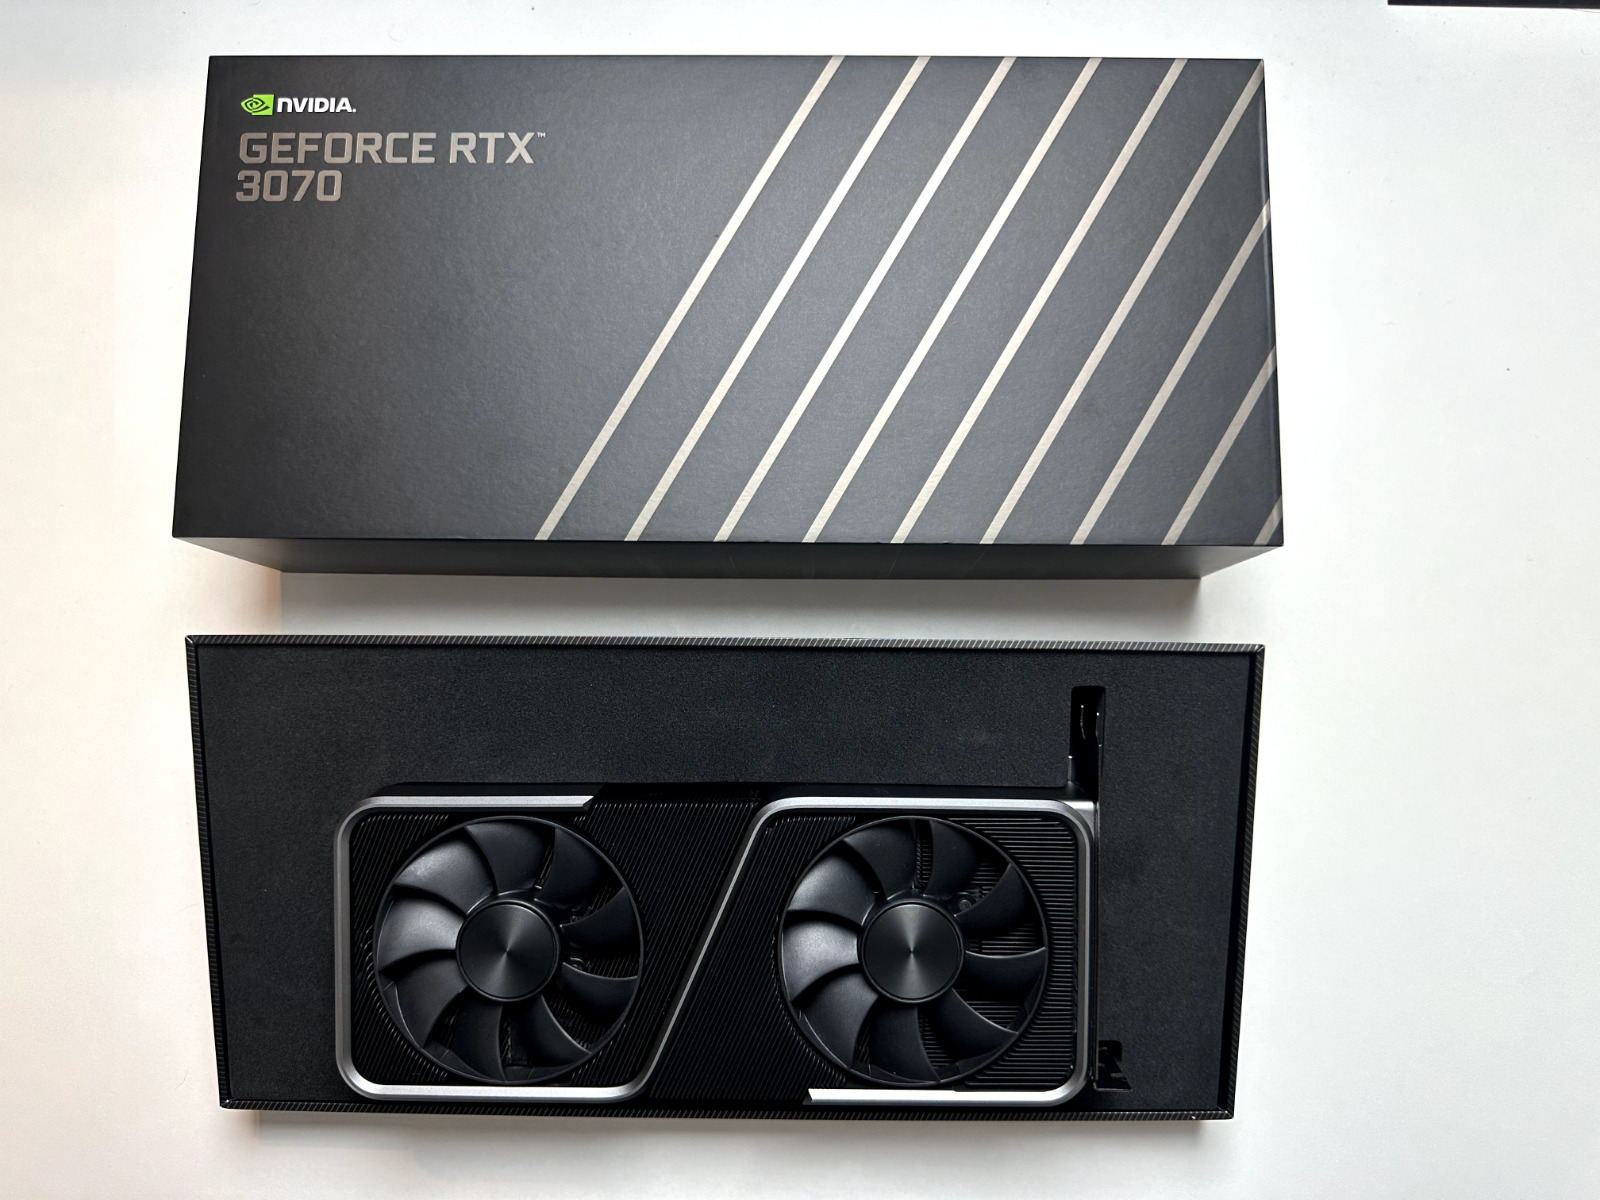 NVIDIA GeForce RTX 3070 Founders Edition 8GB GDDR6 Graphics Card - BARELY USED